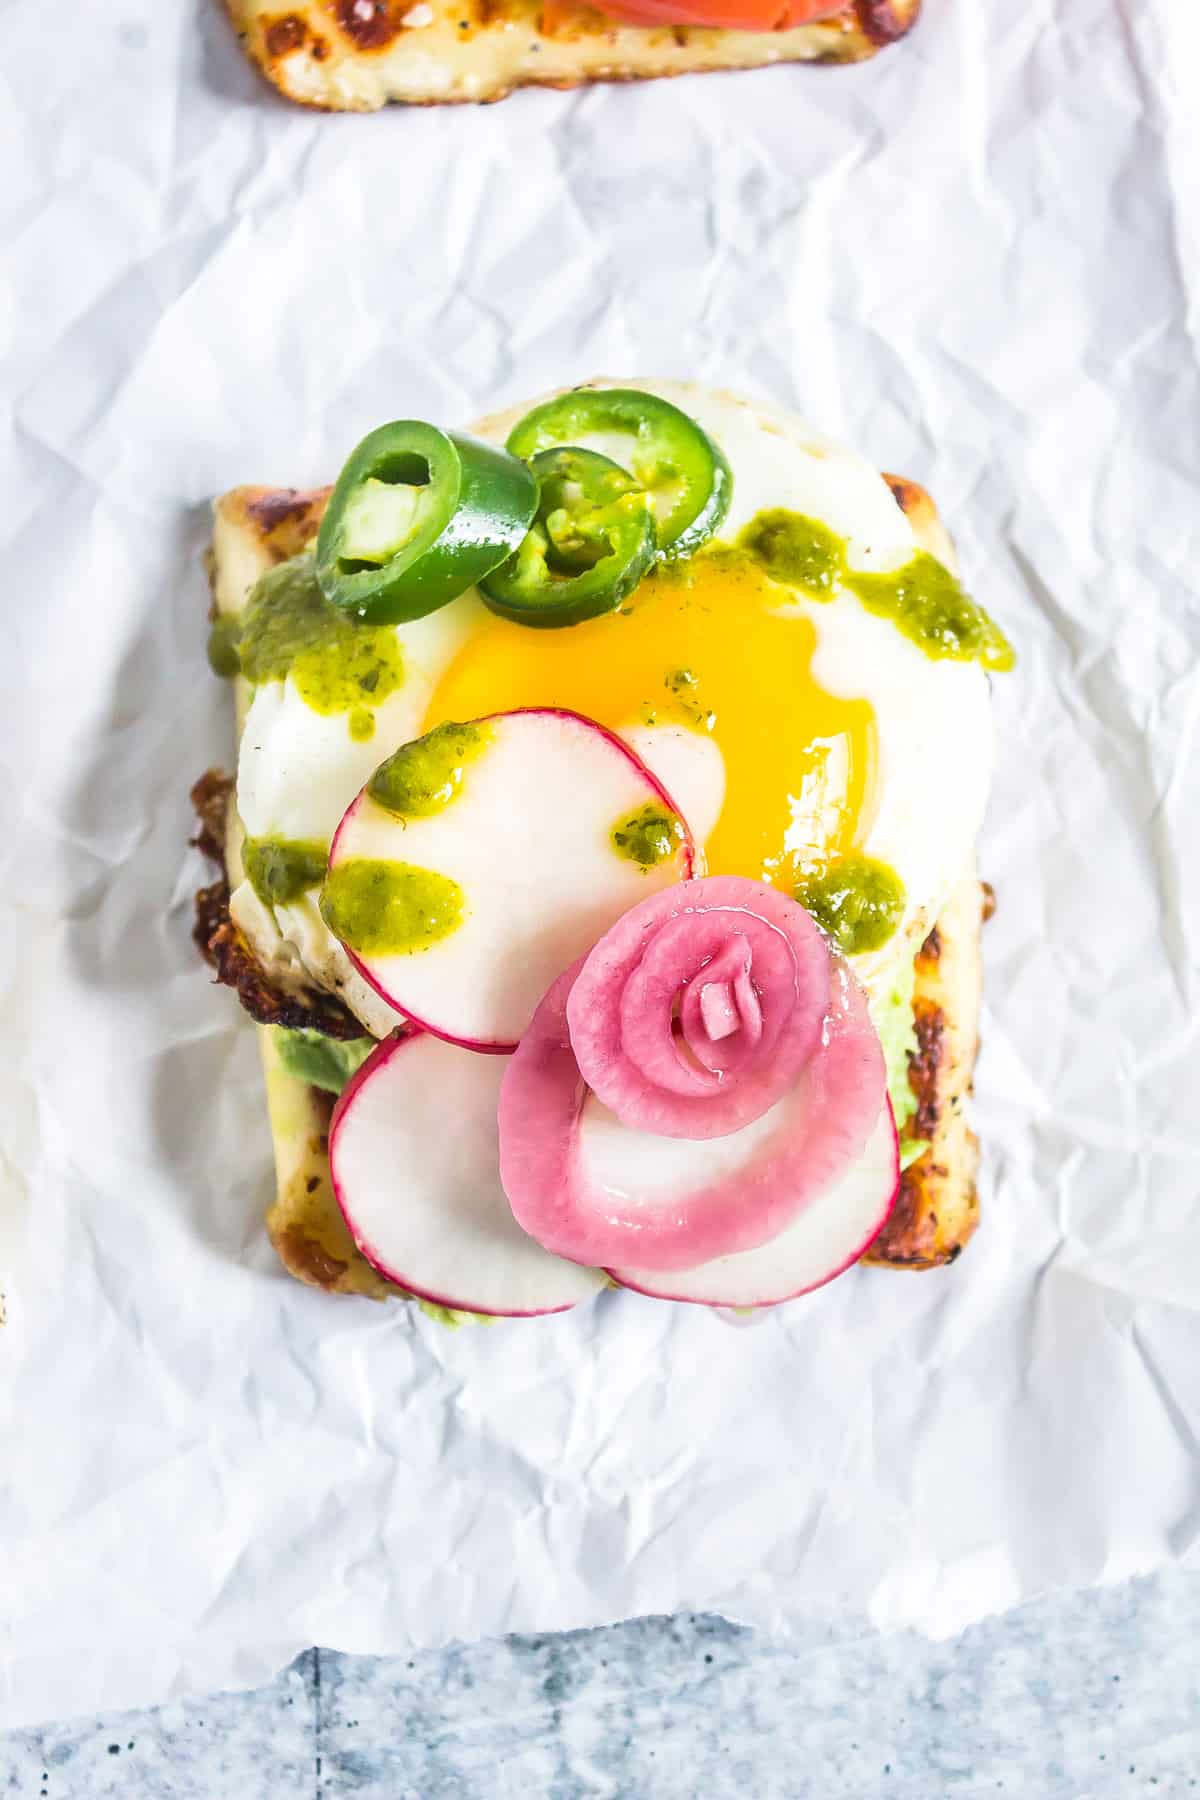 fried egg, pickled onion, jalapenos, and radish on toasted bread cheese